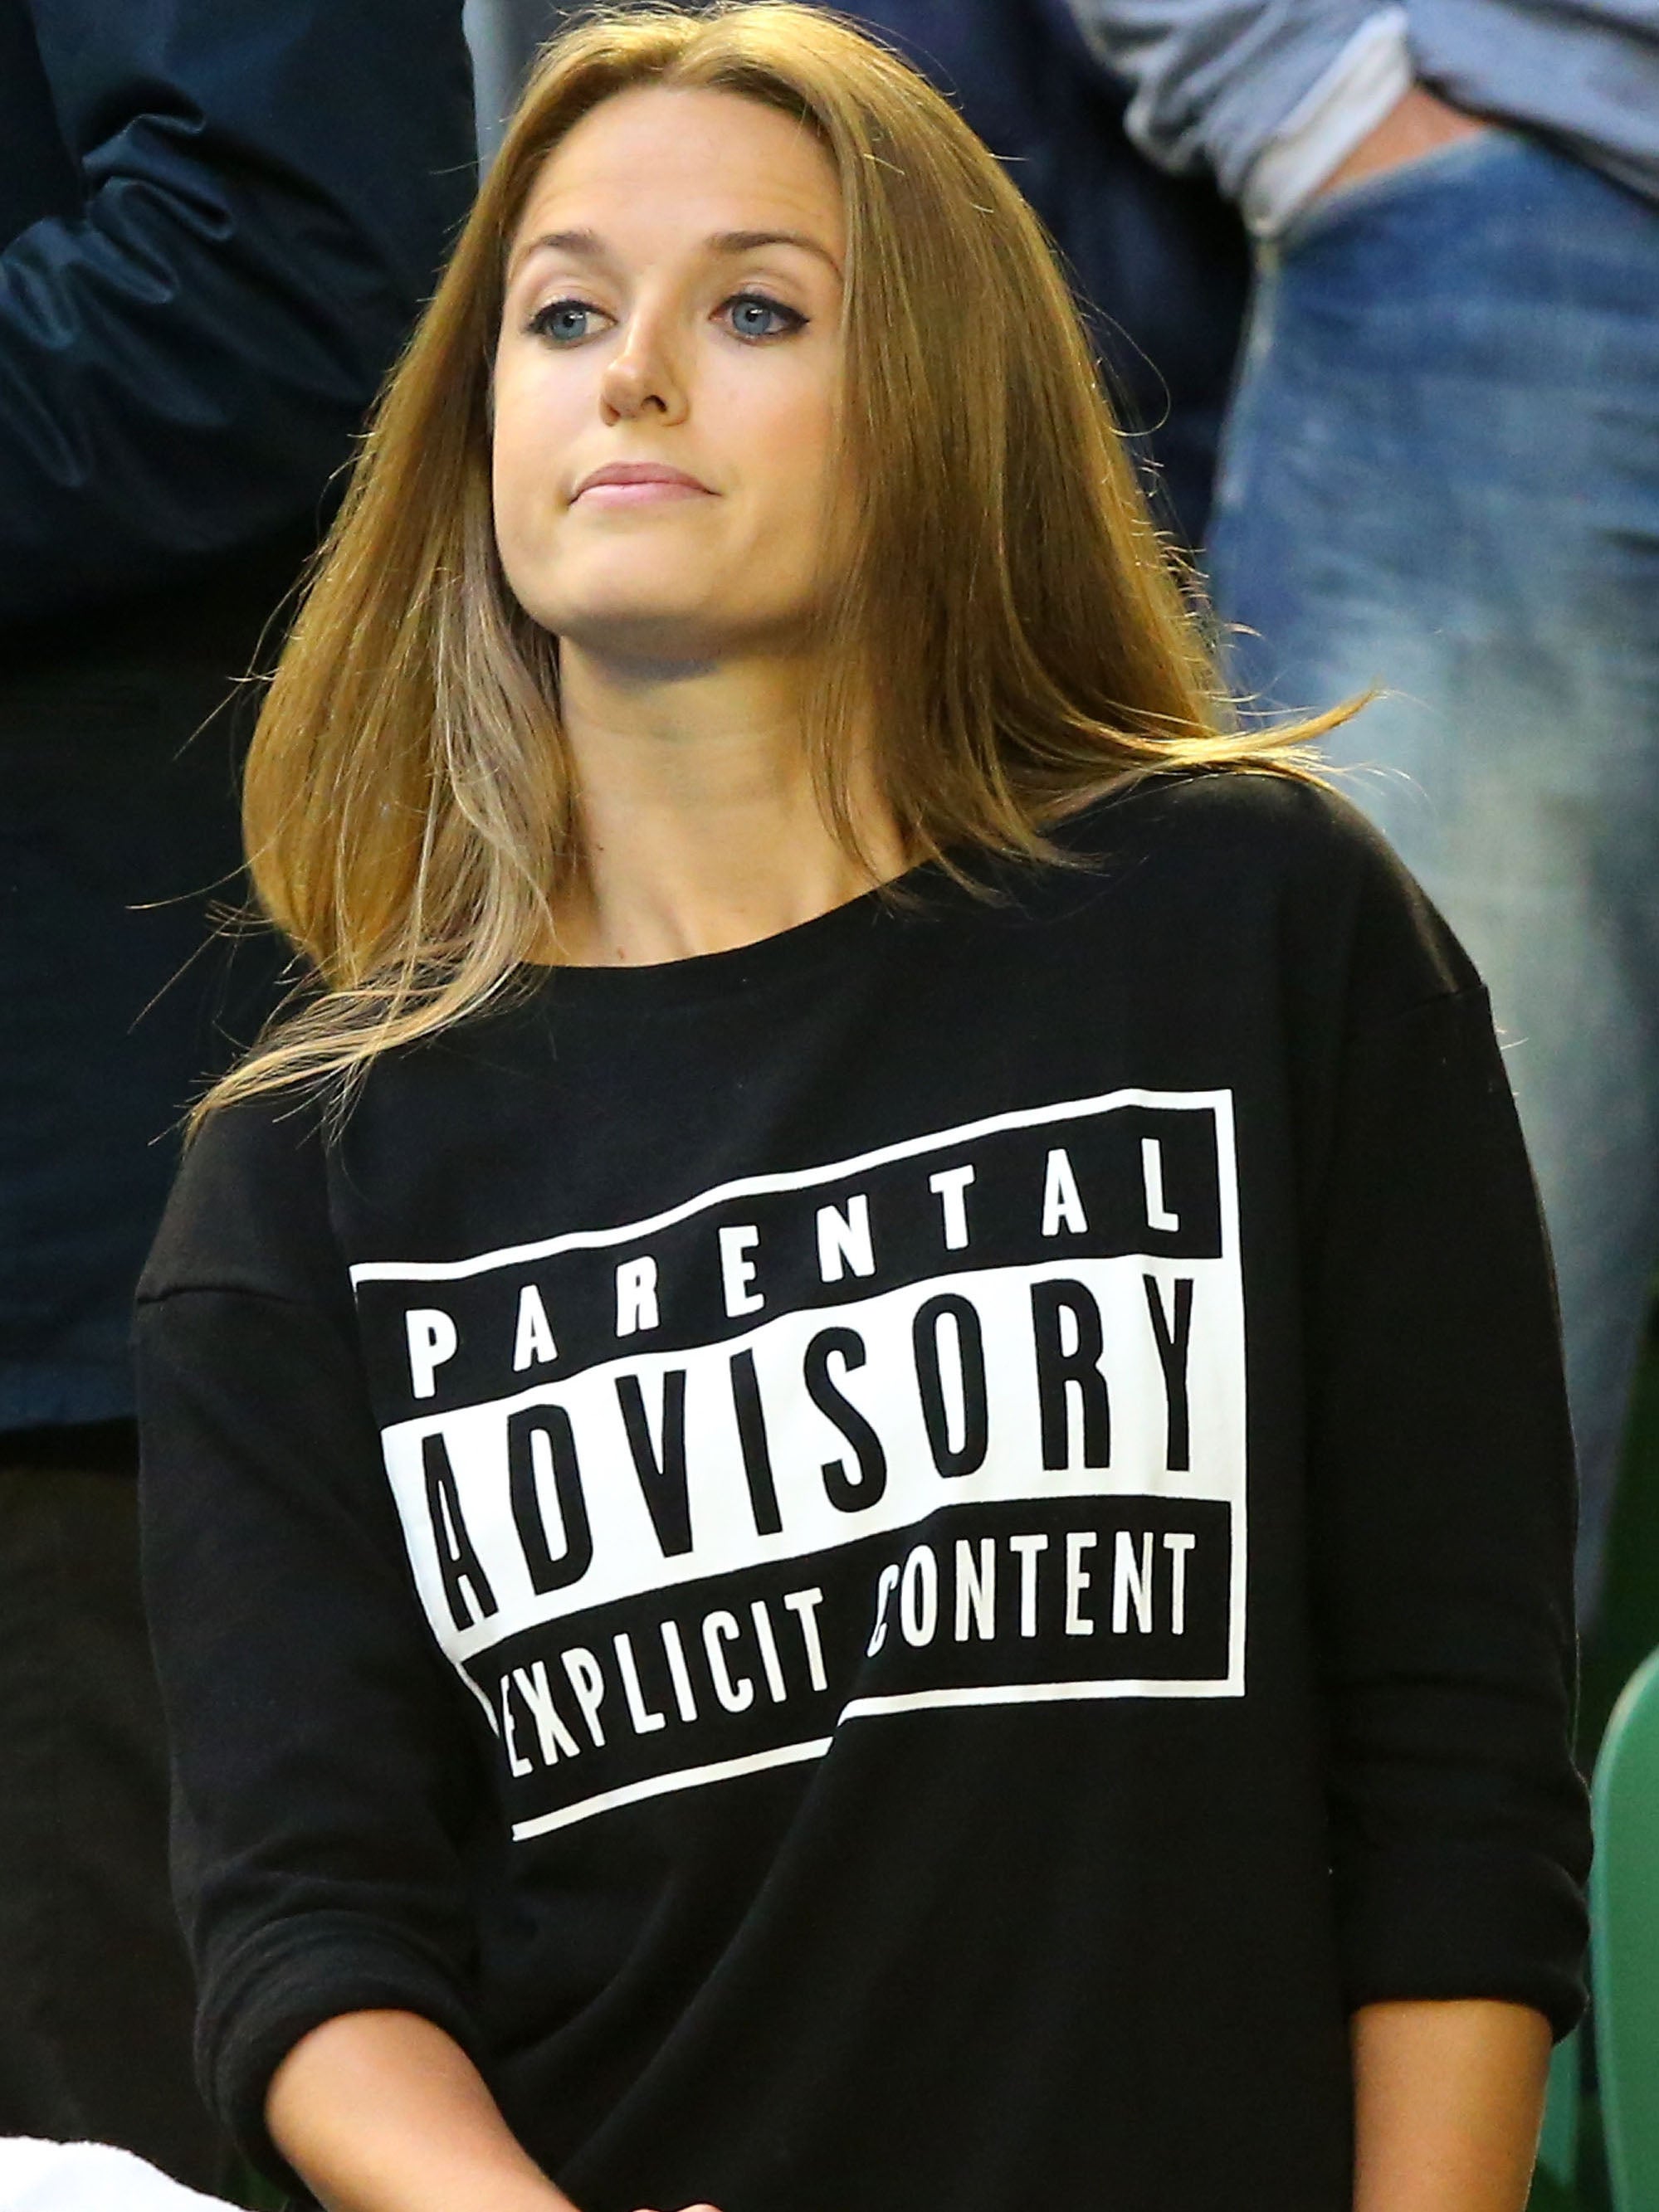 Kim Sears owned her 'potty mouth'